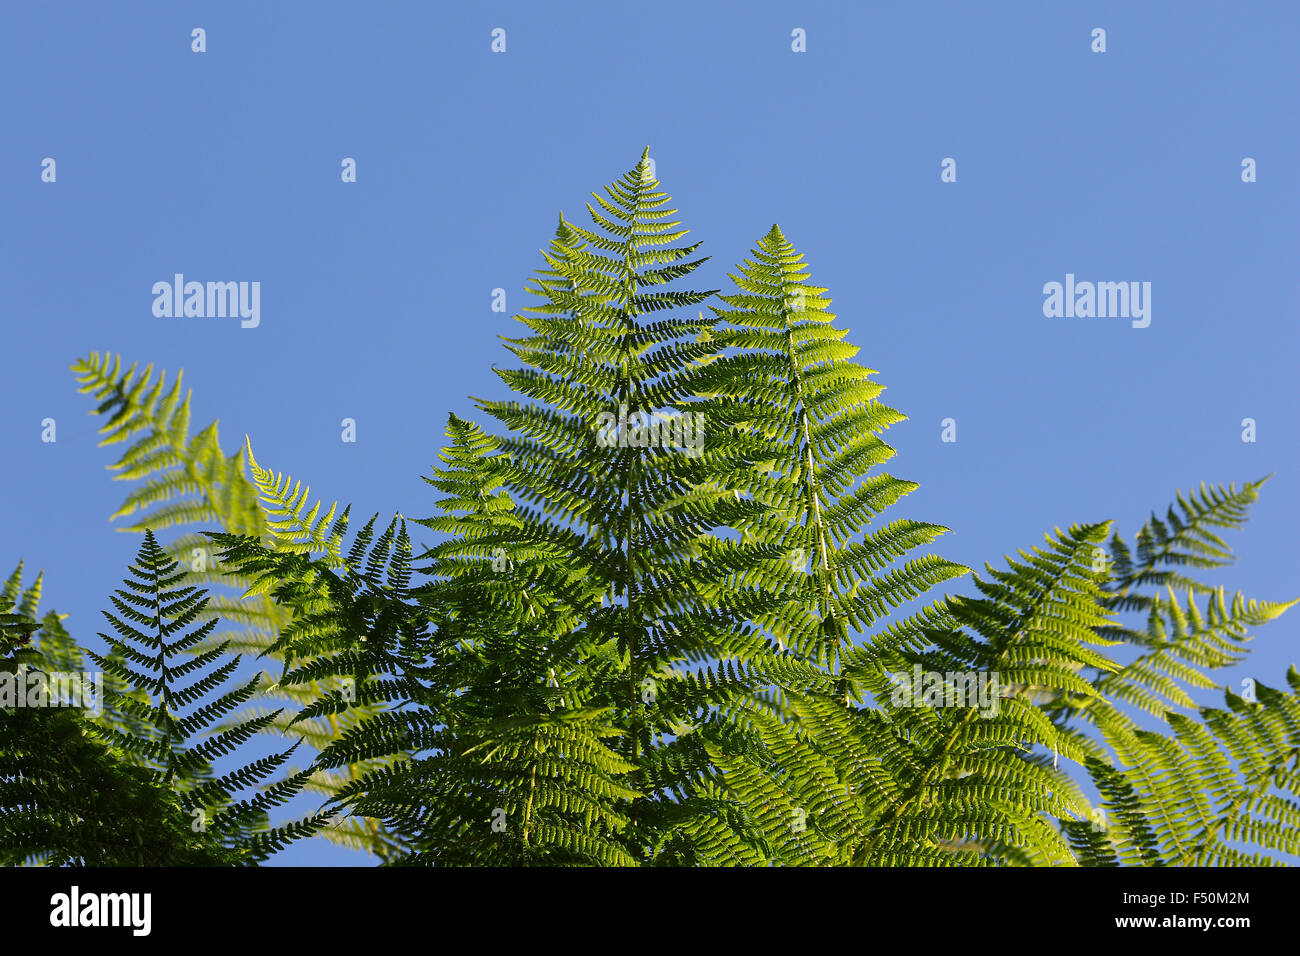 Group of green ferns against clear blue skies Stock Photo